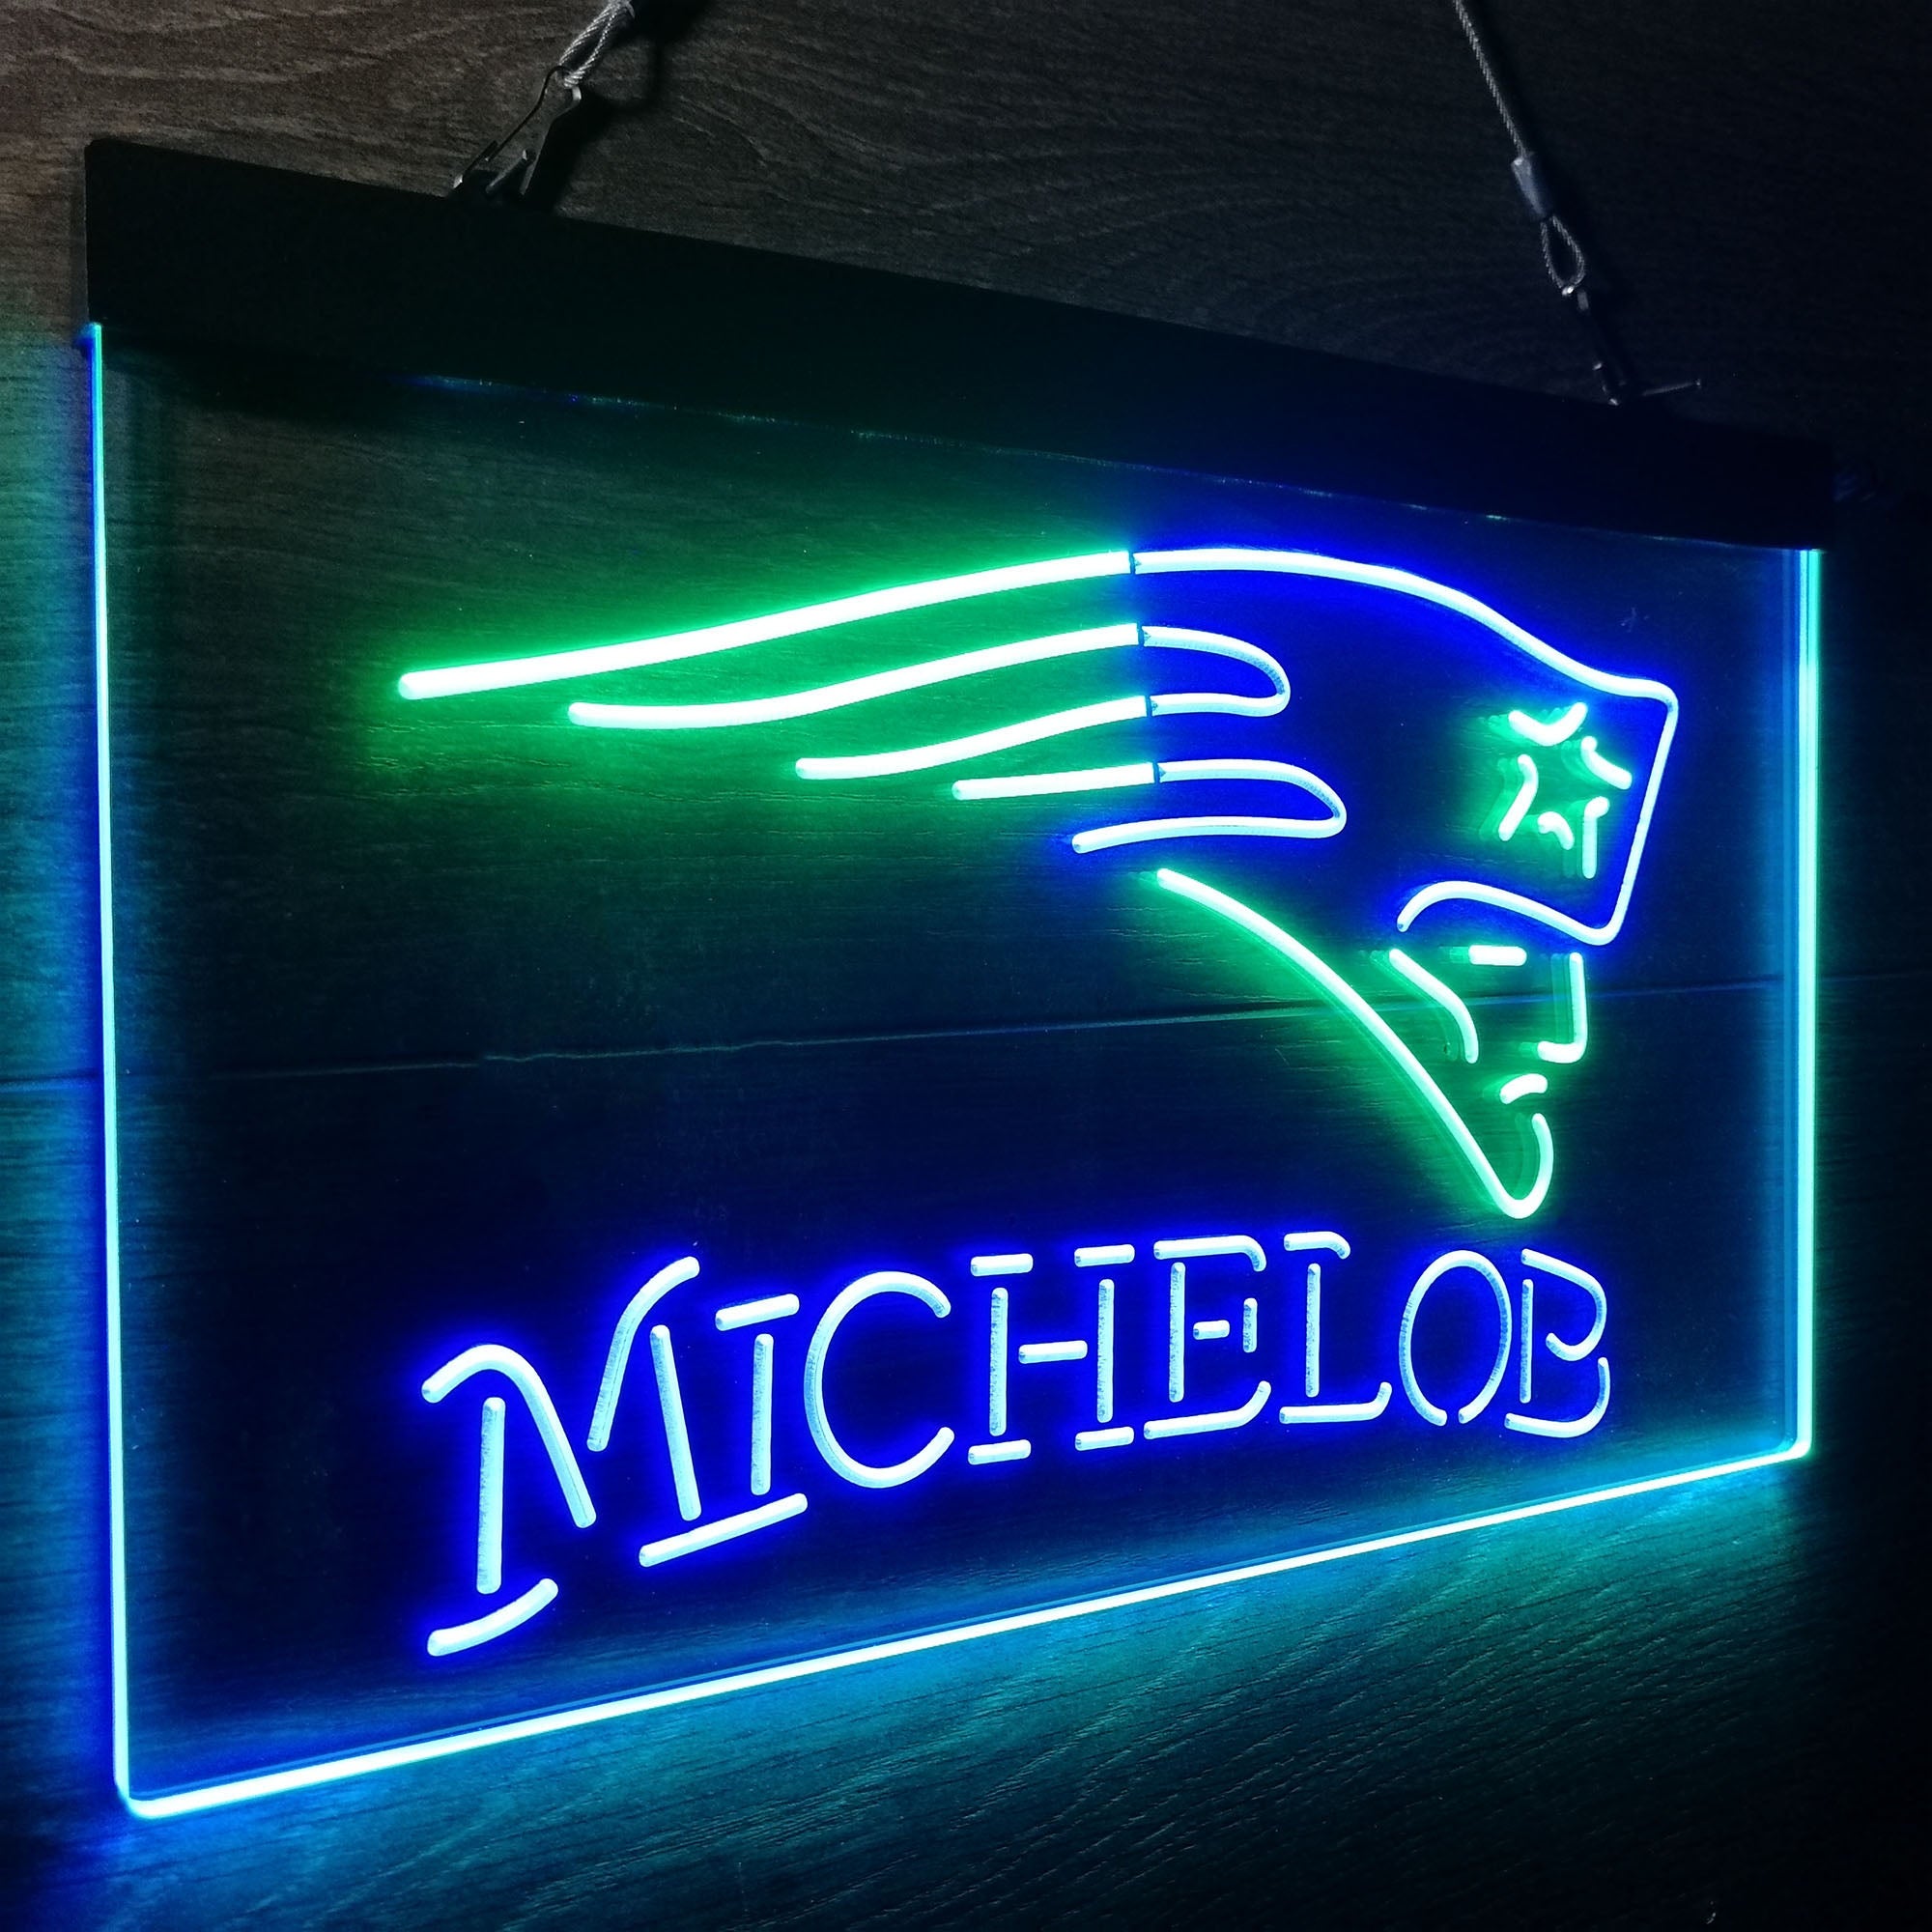 New Englands Football Club Patriots League Michelob Bar LED Neon Sign